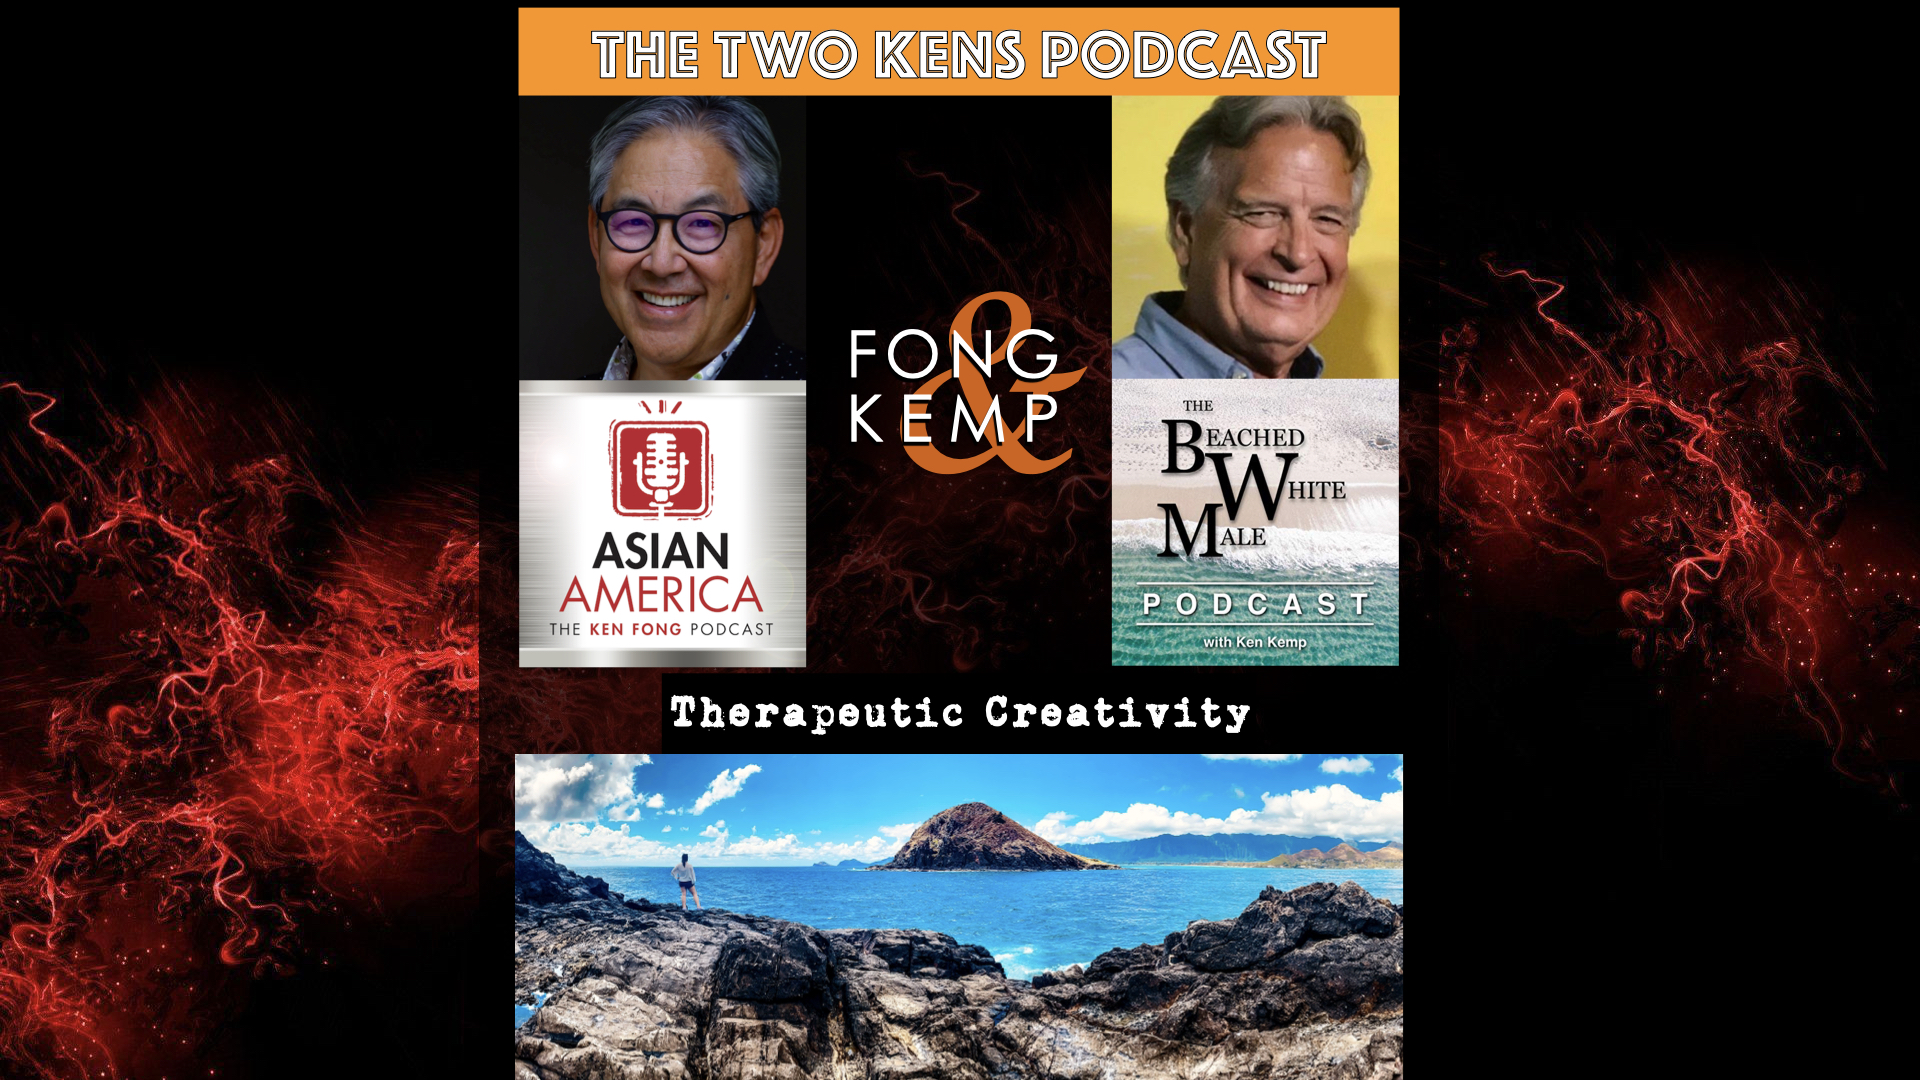 Ep 440: The Two Kens Series On Grief & Therapeutic Creativity